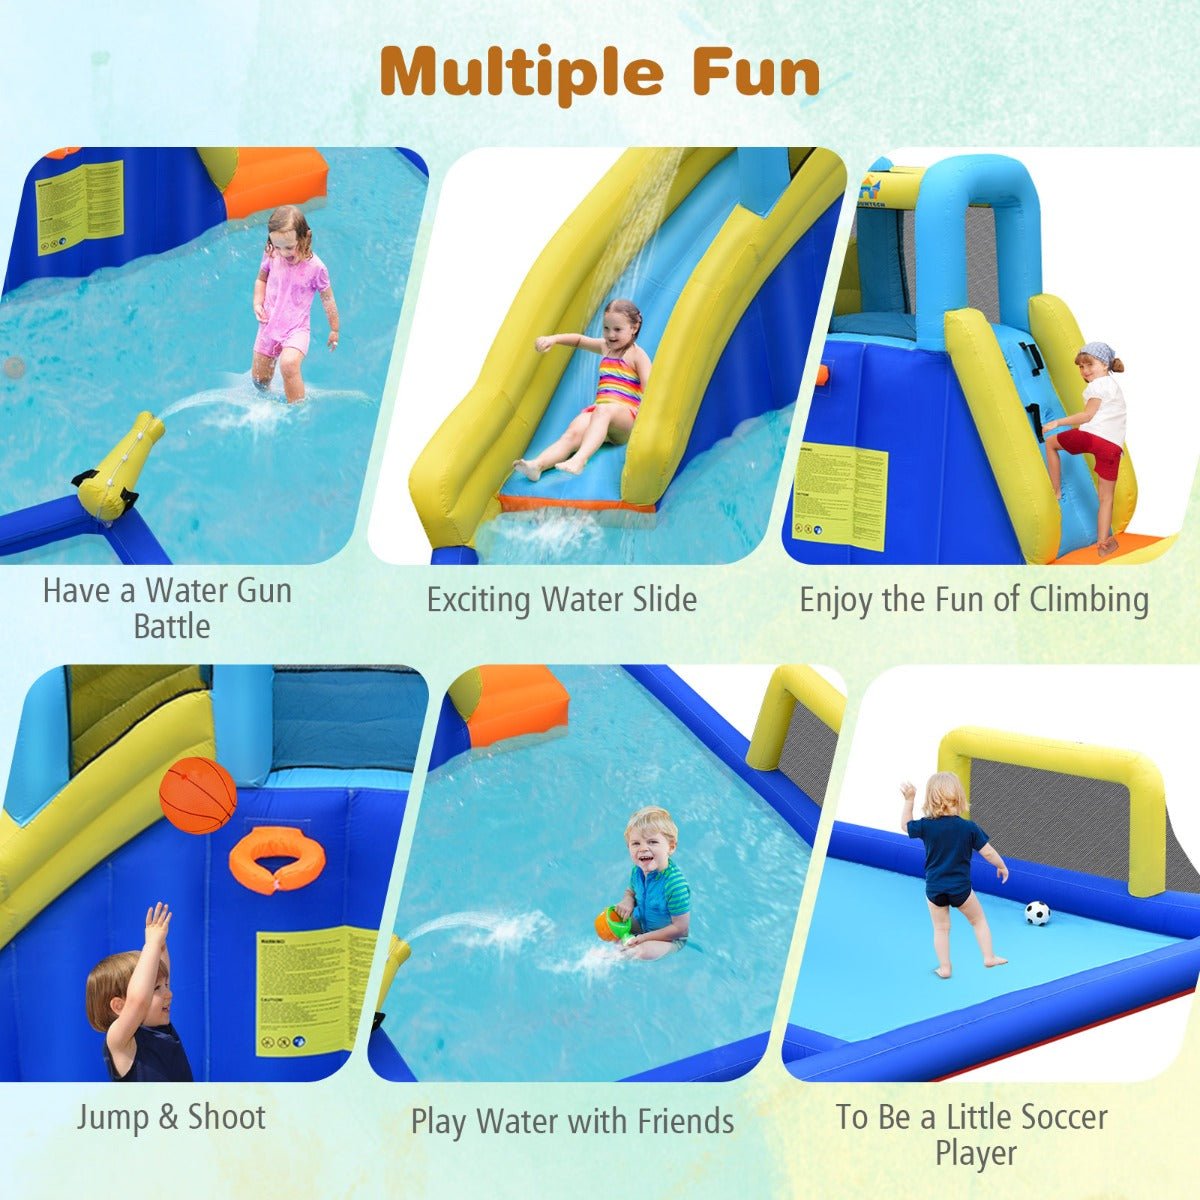 Children's Inflatable Water Play Area - Slide, Sprayers, and Joyful Playtime